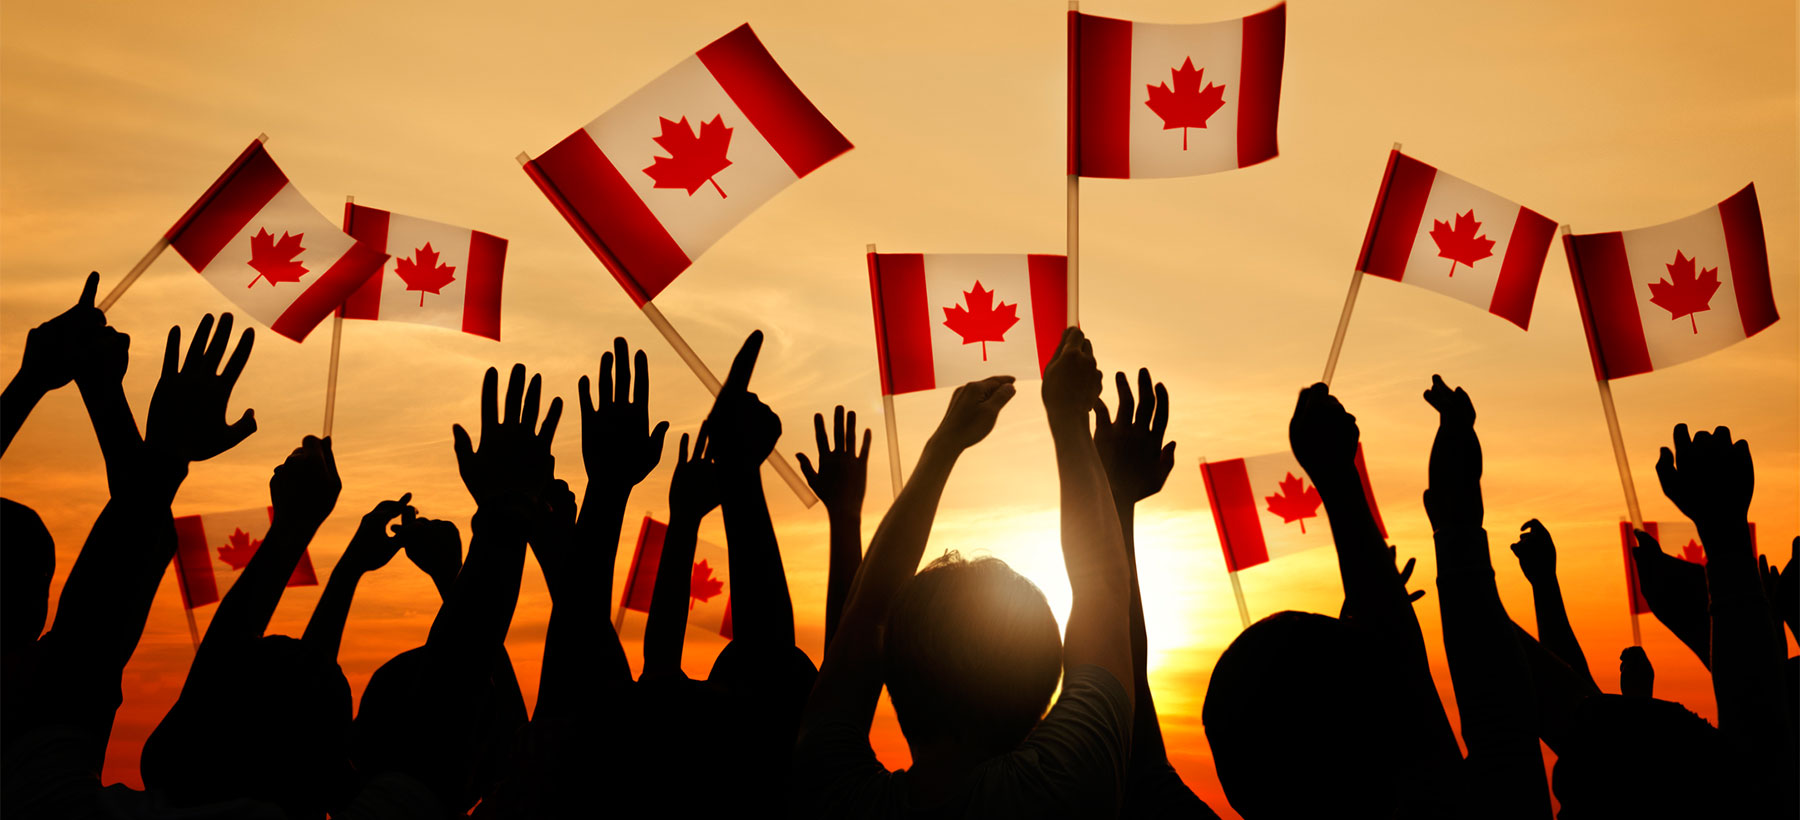 hands holding Canadian flags up in the air